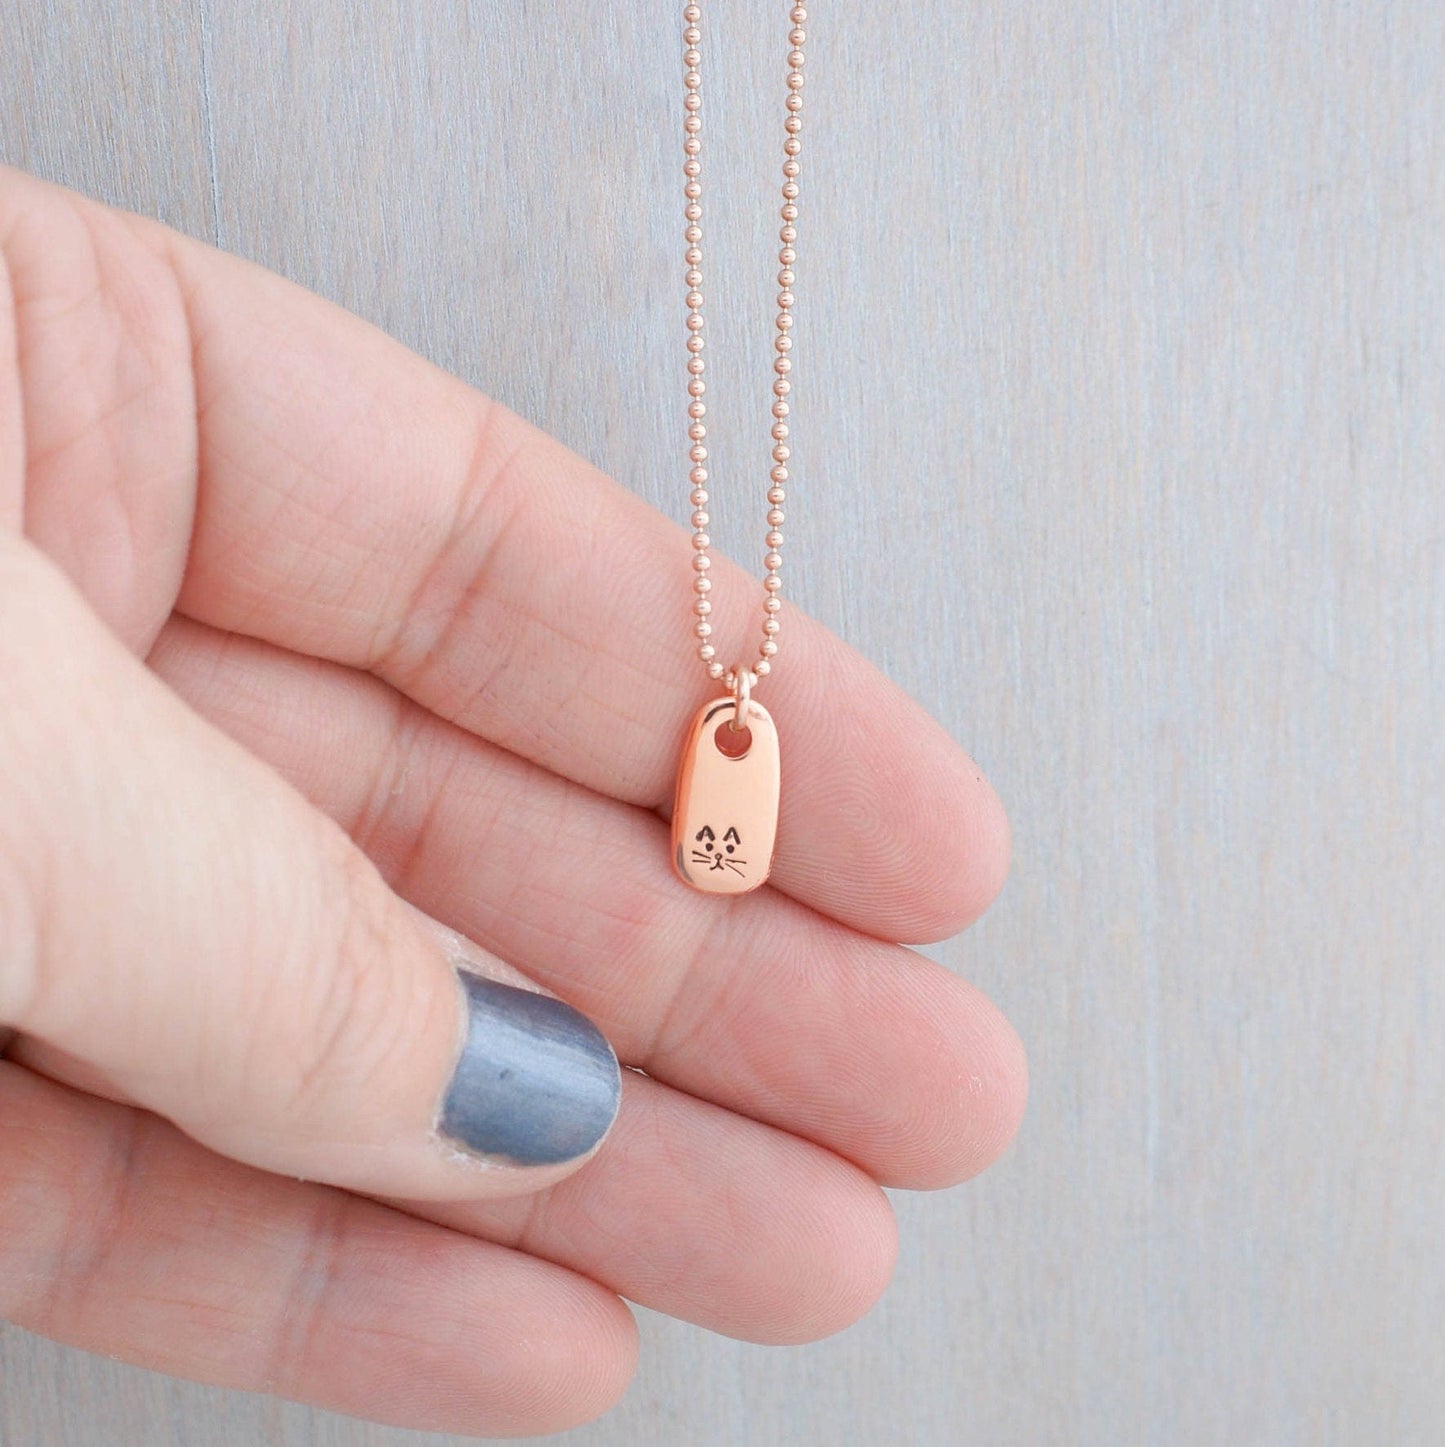 Petite Rose Gold Necklace handstamped with a kitty face in hand